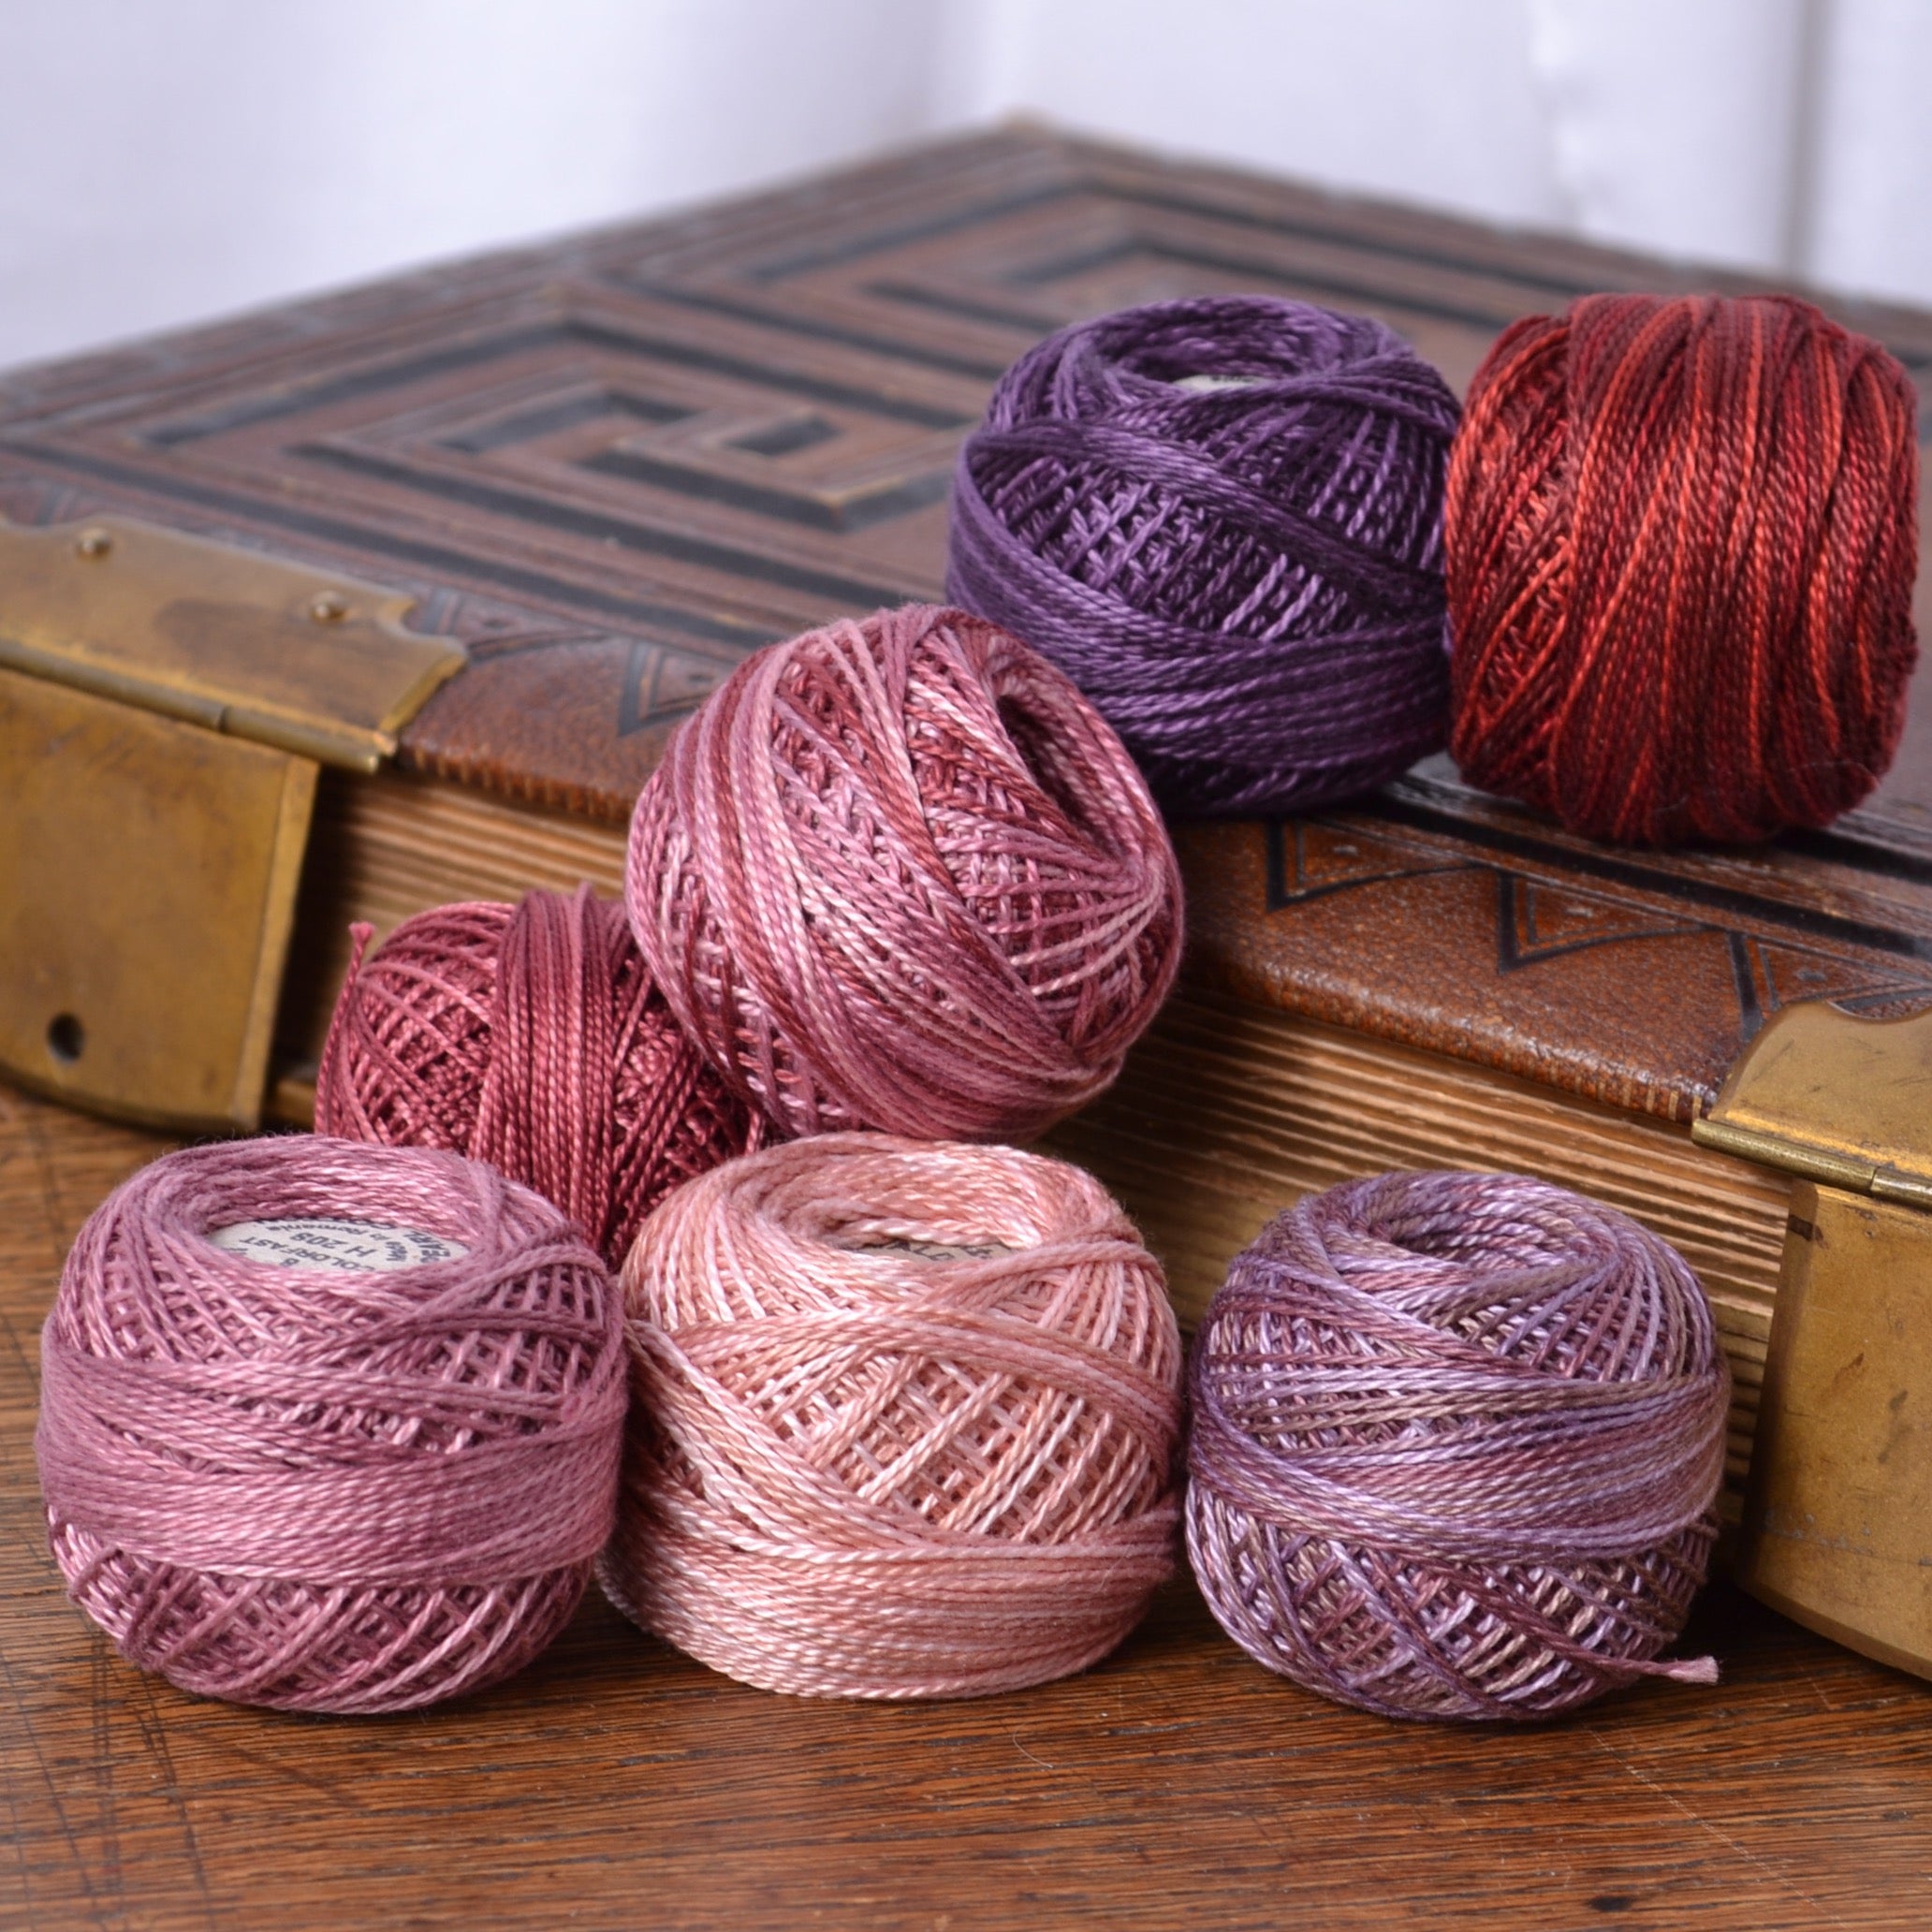 Valdani perle cotton threads in pink and purple